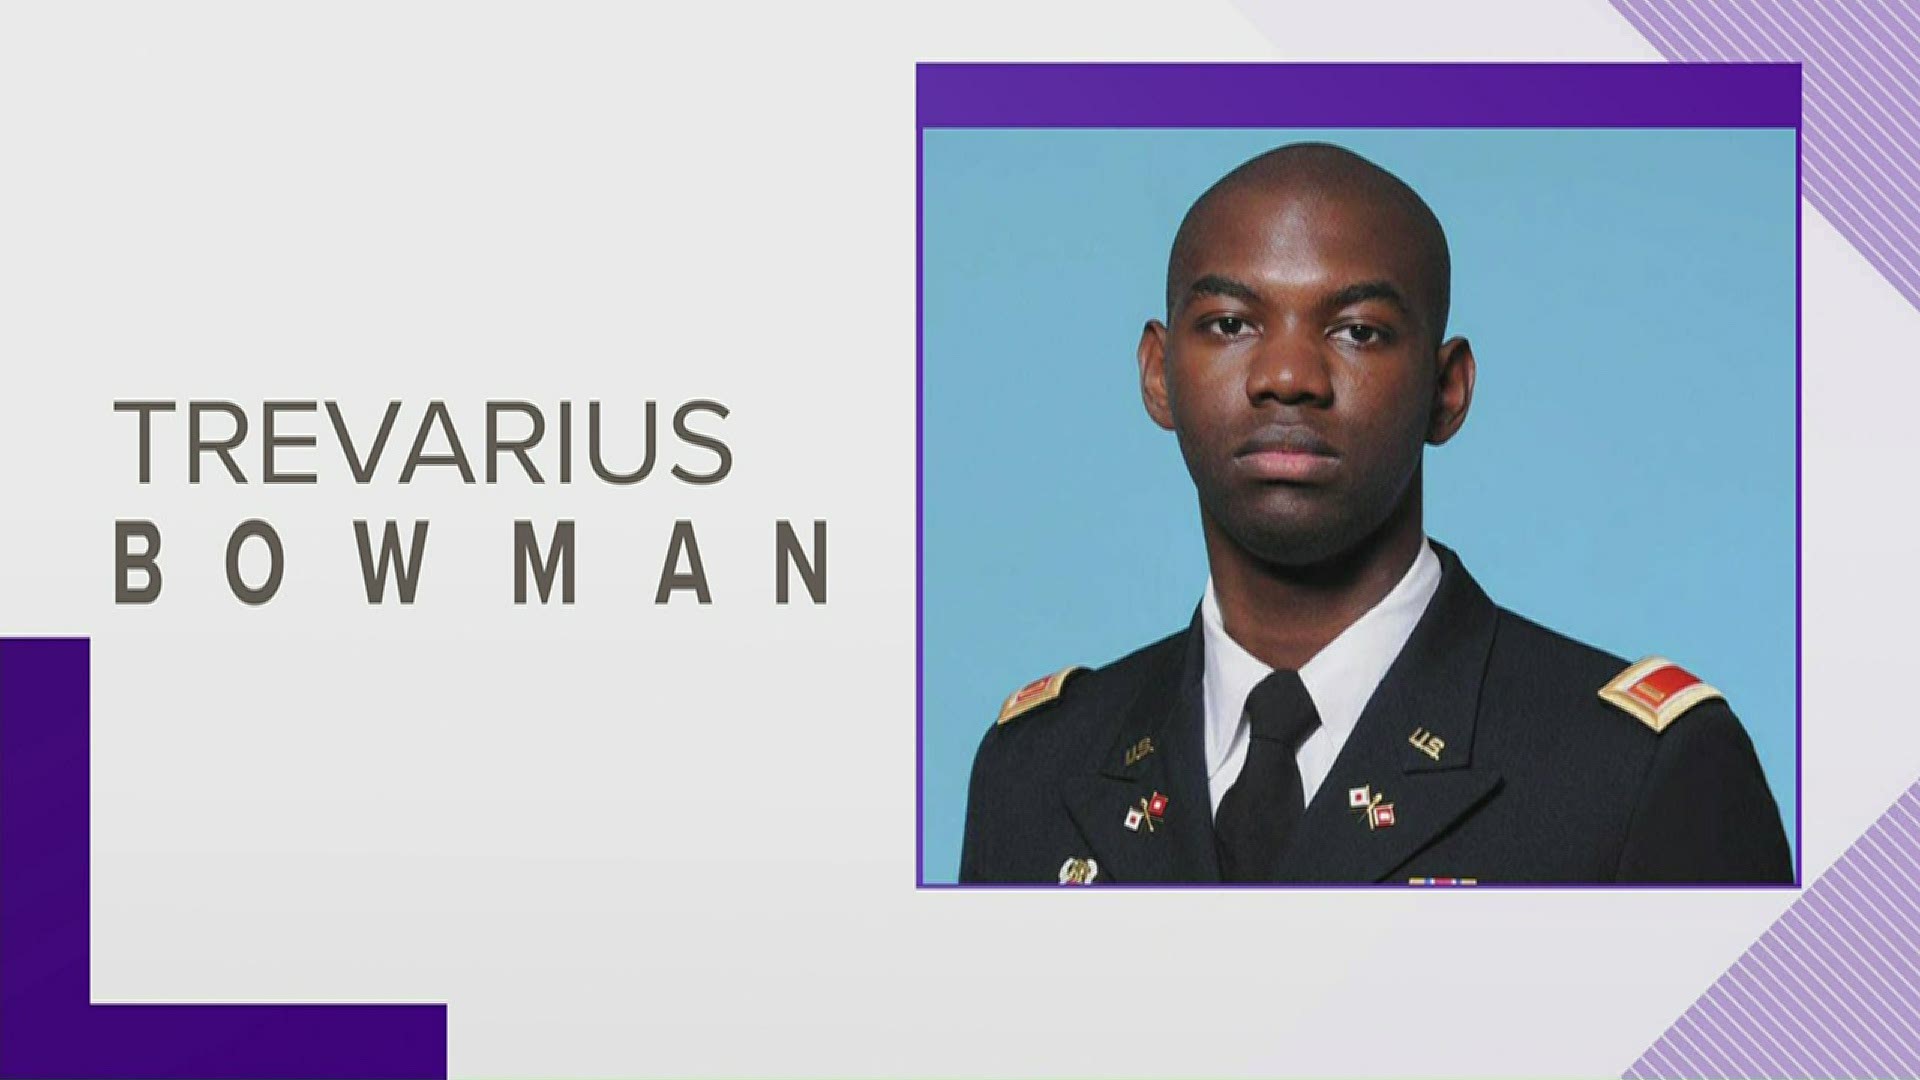 First Lt. Trevarius Bowman, 25 died at Bagram Air Force Base in Afghanistan from a non-combat releated injury.